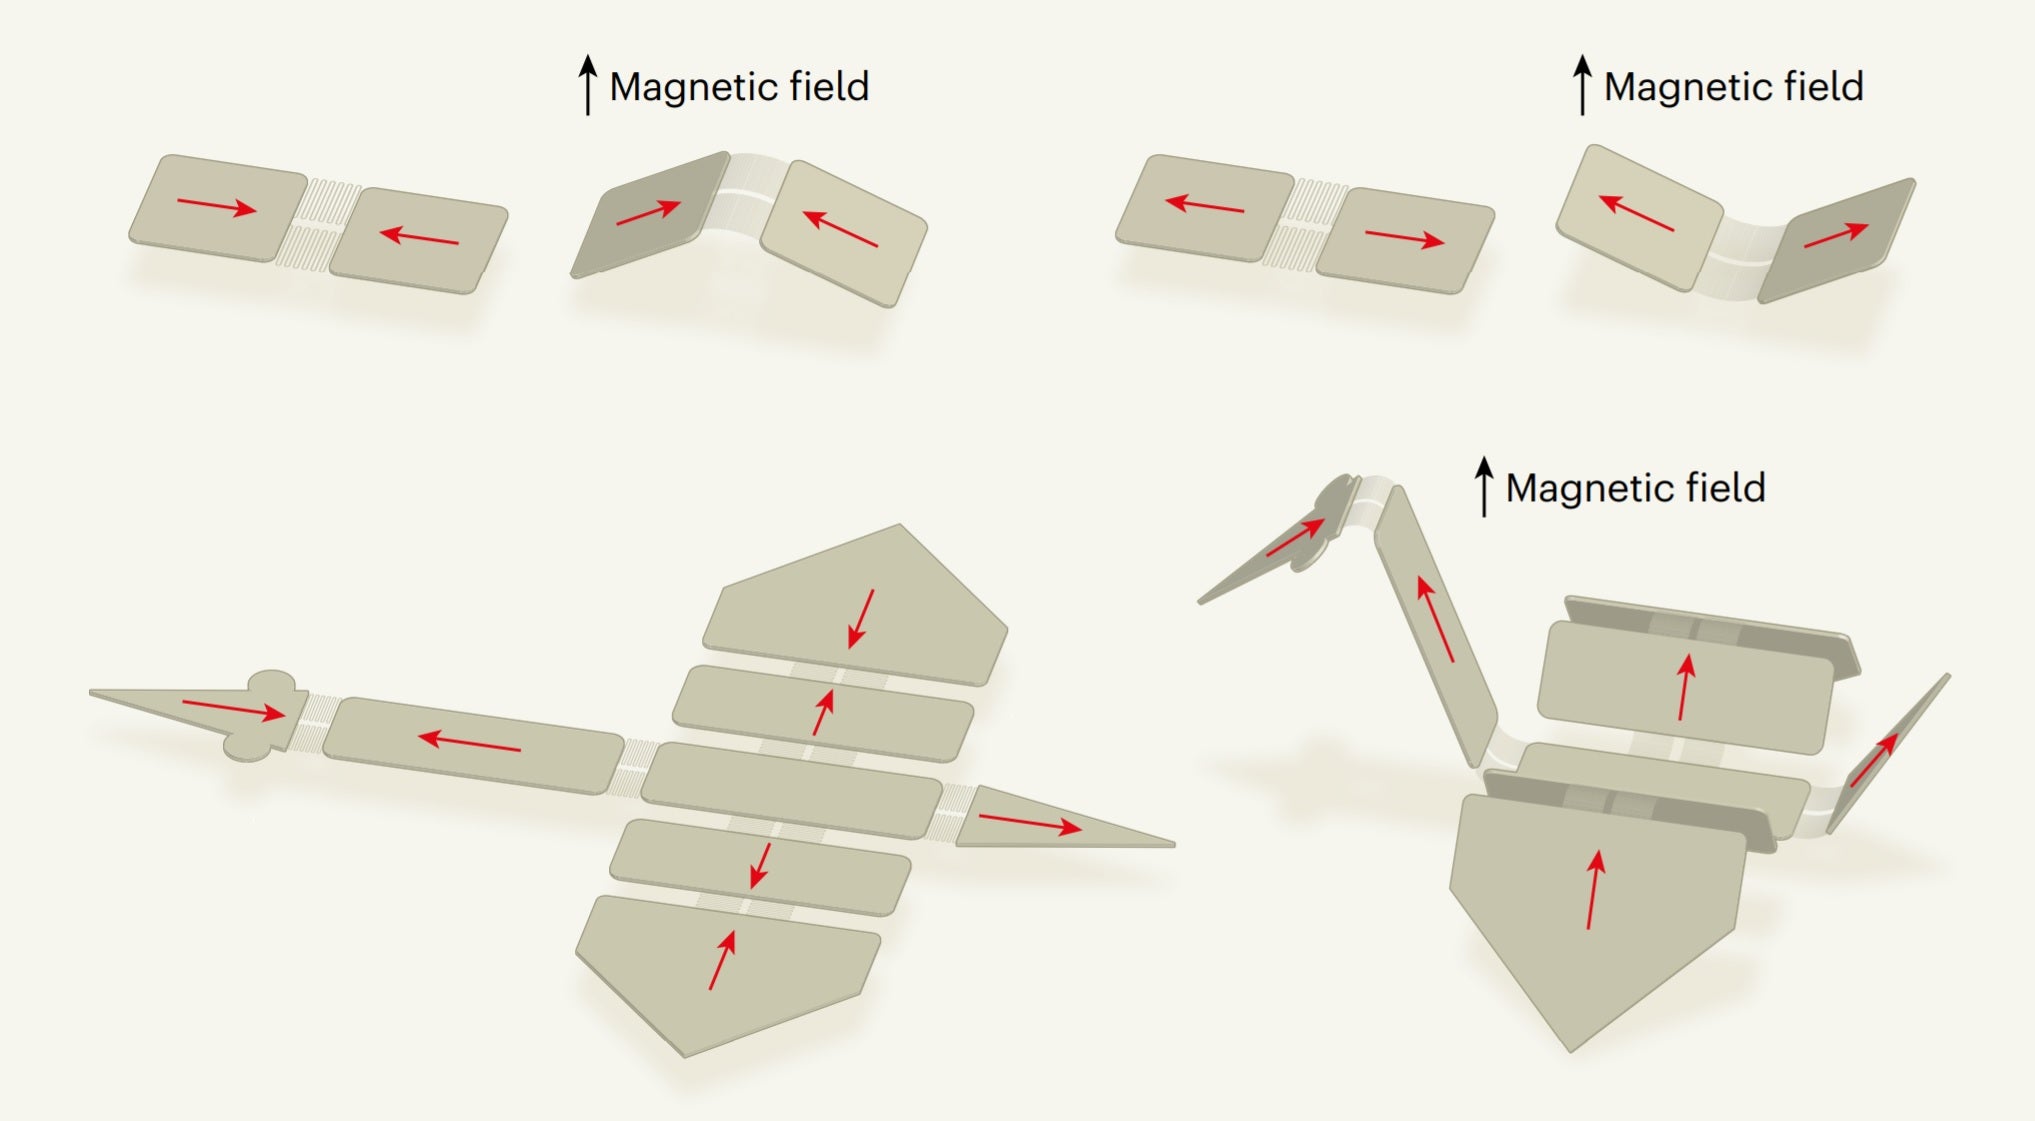 Robots assembled from microscopic panels have different magnetisation directions that can be manipulated to undergo complex movements